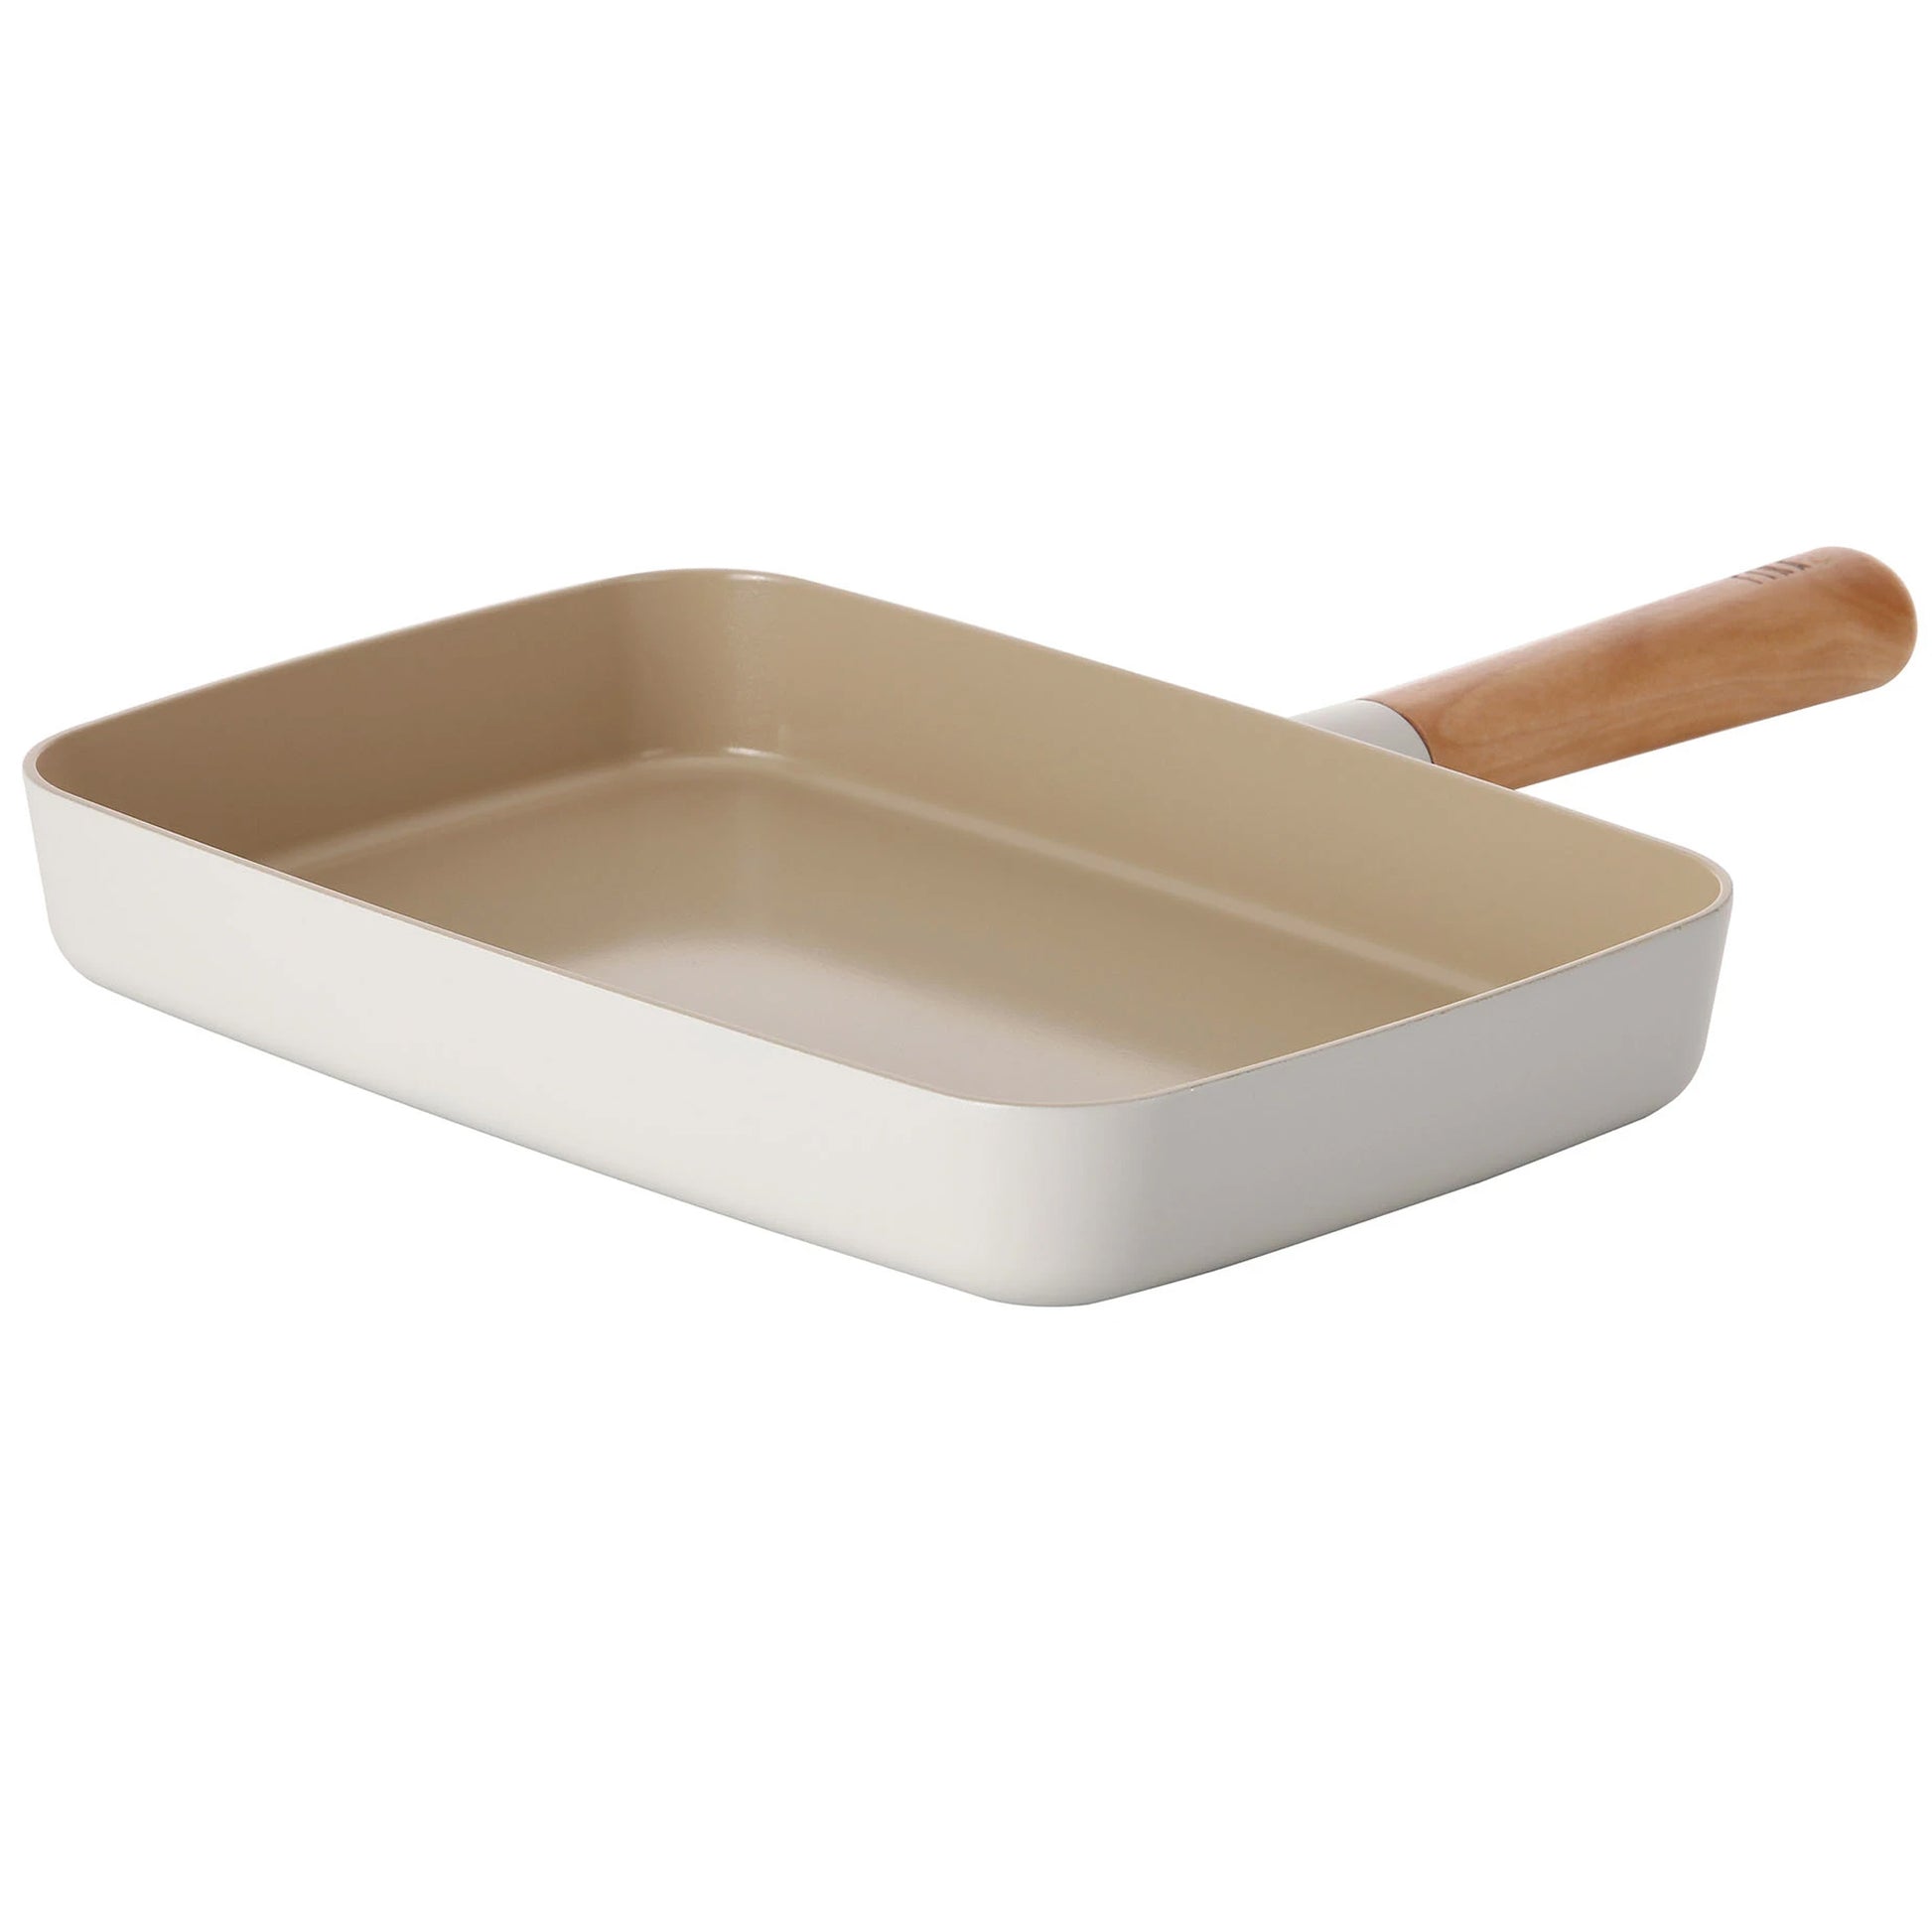 NEOFLAM FIKA 11.4 (29cm) Brunch Pan with Lid for Stovetops and Induction